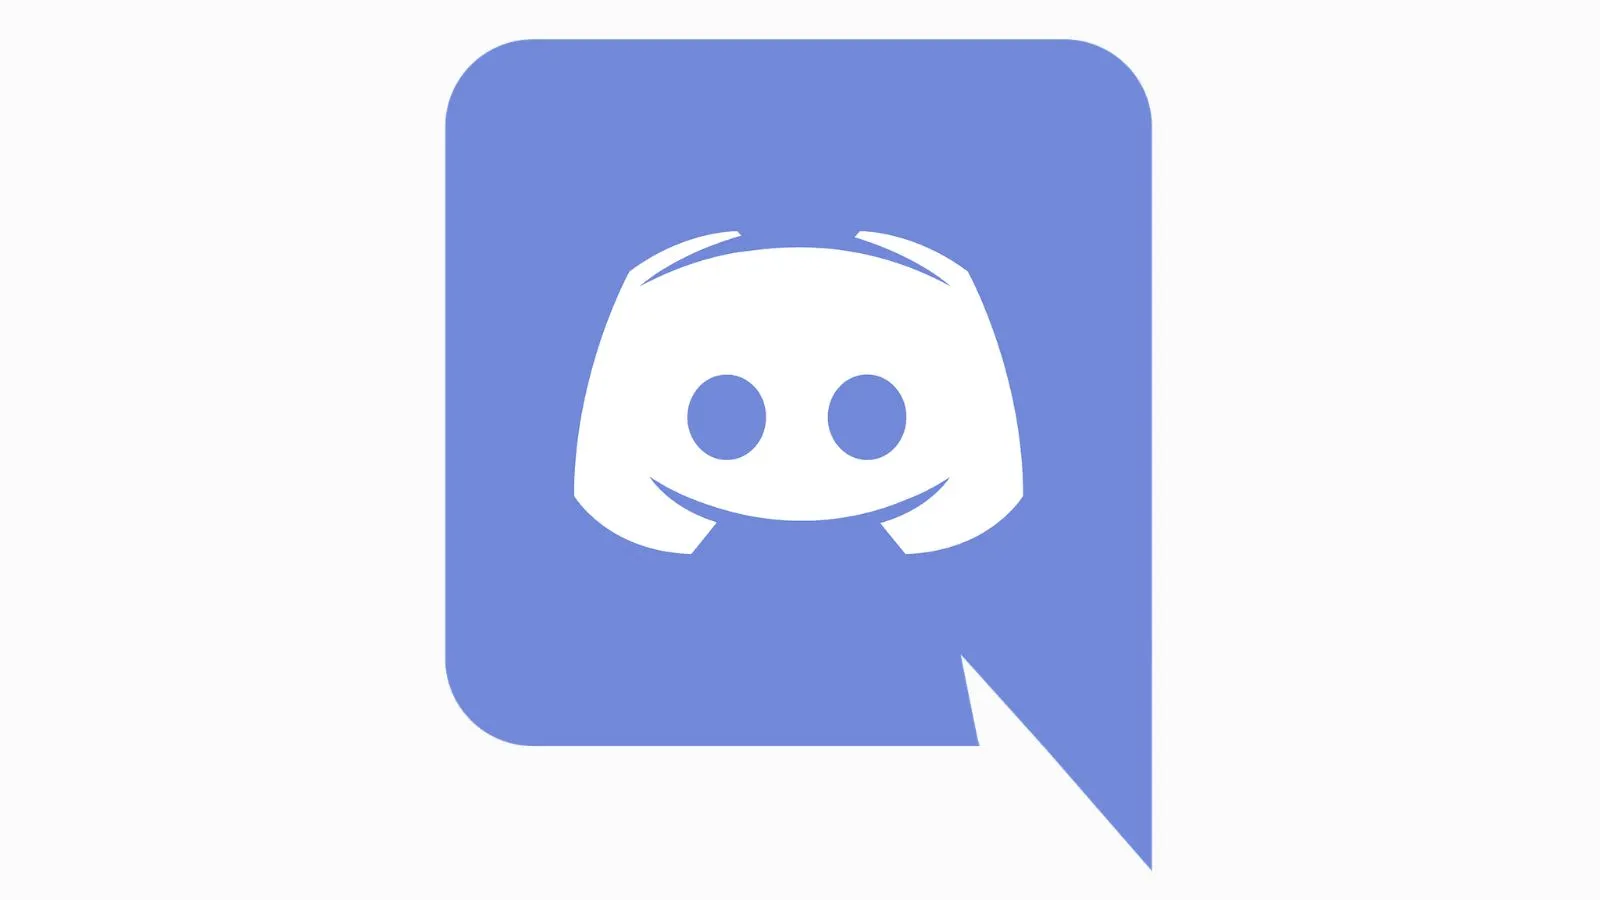 Discord mobile app gets redesigned interface, loads faster and makes search easier | Technology News